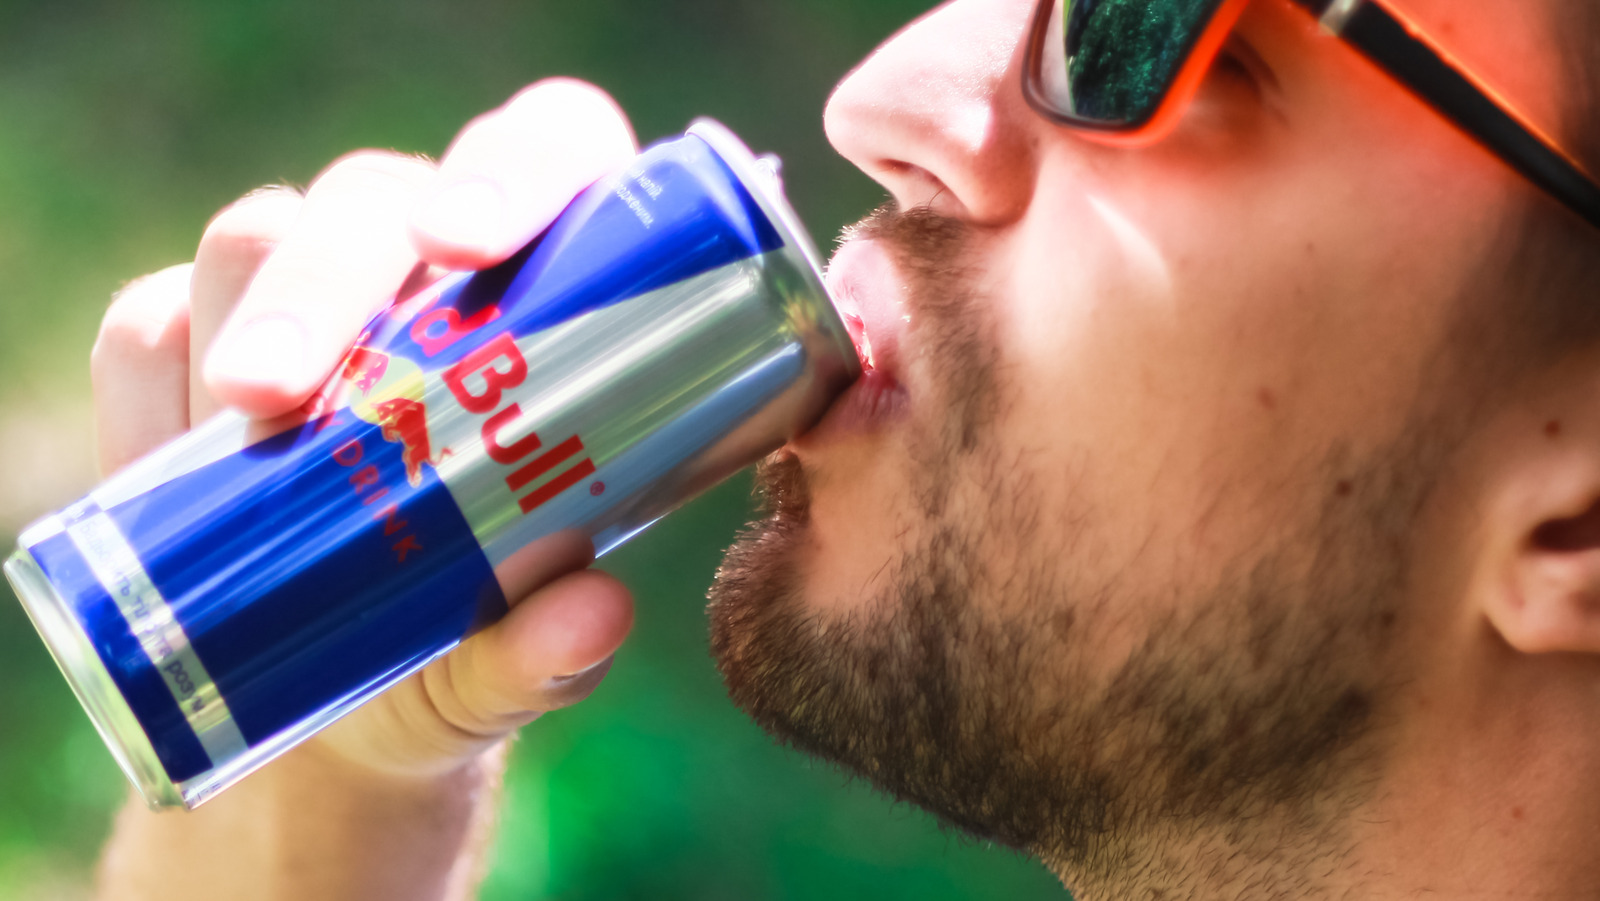 skandale betyder kode How Bad Is Red Bull For Your Health?